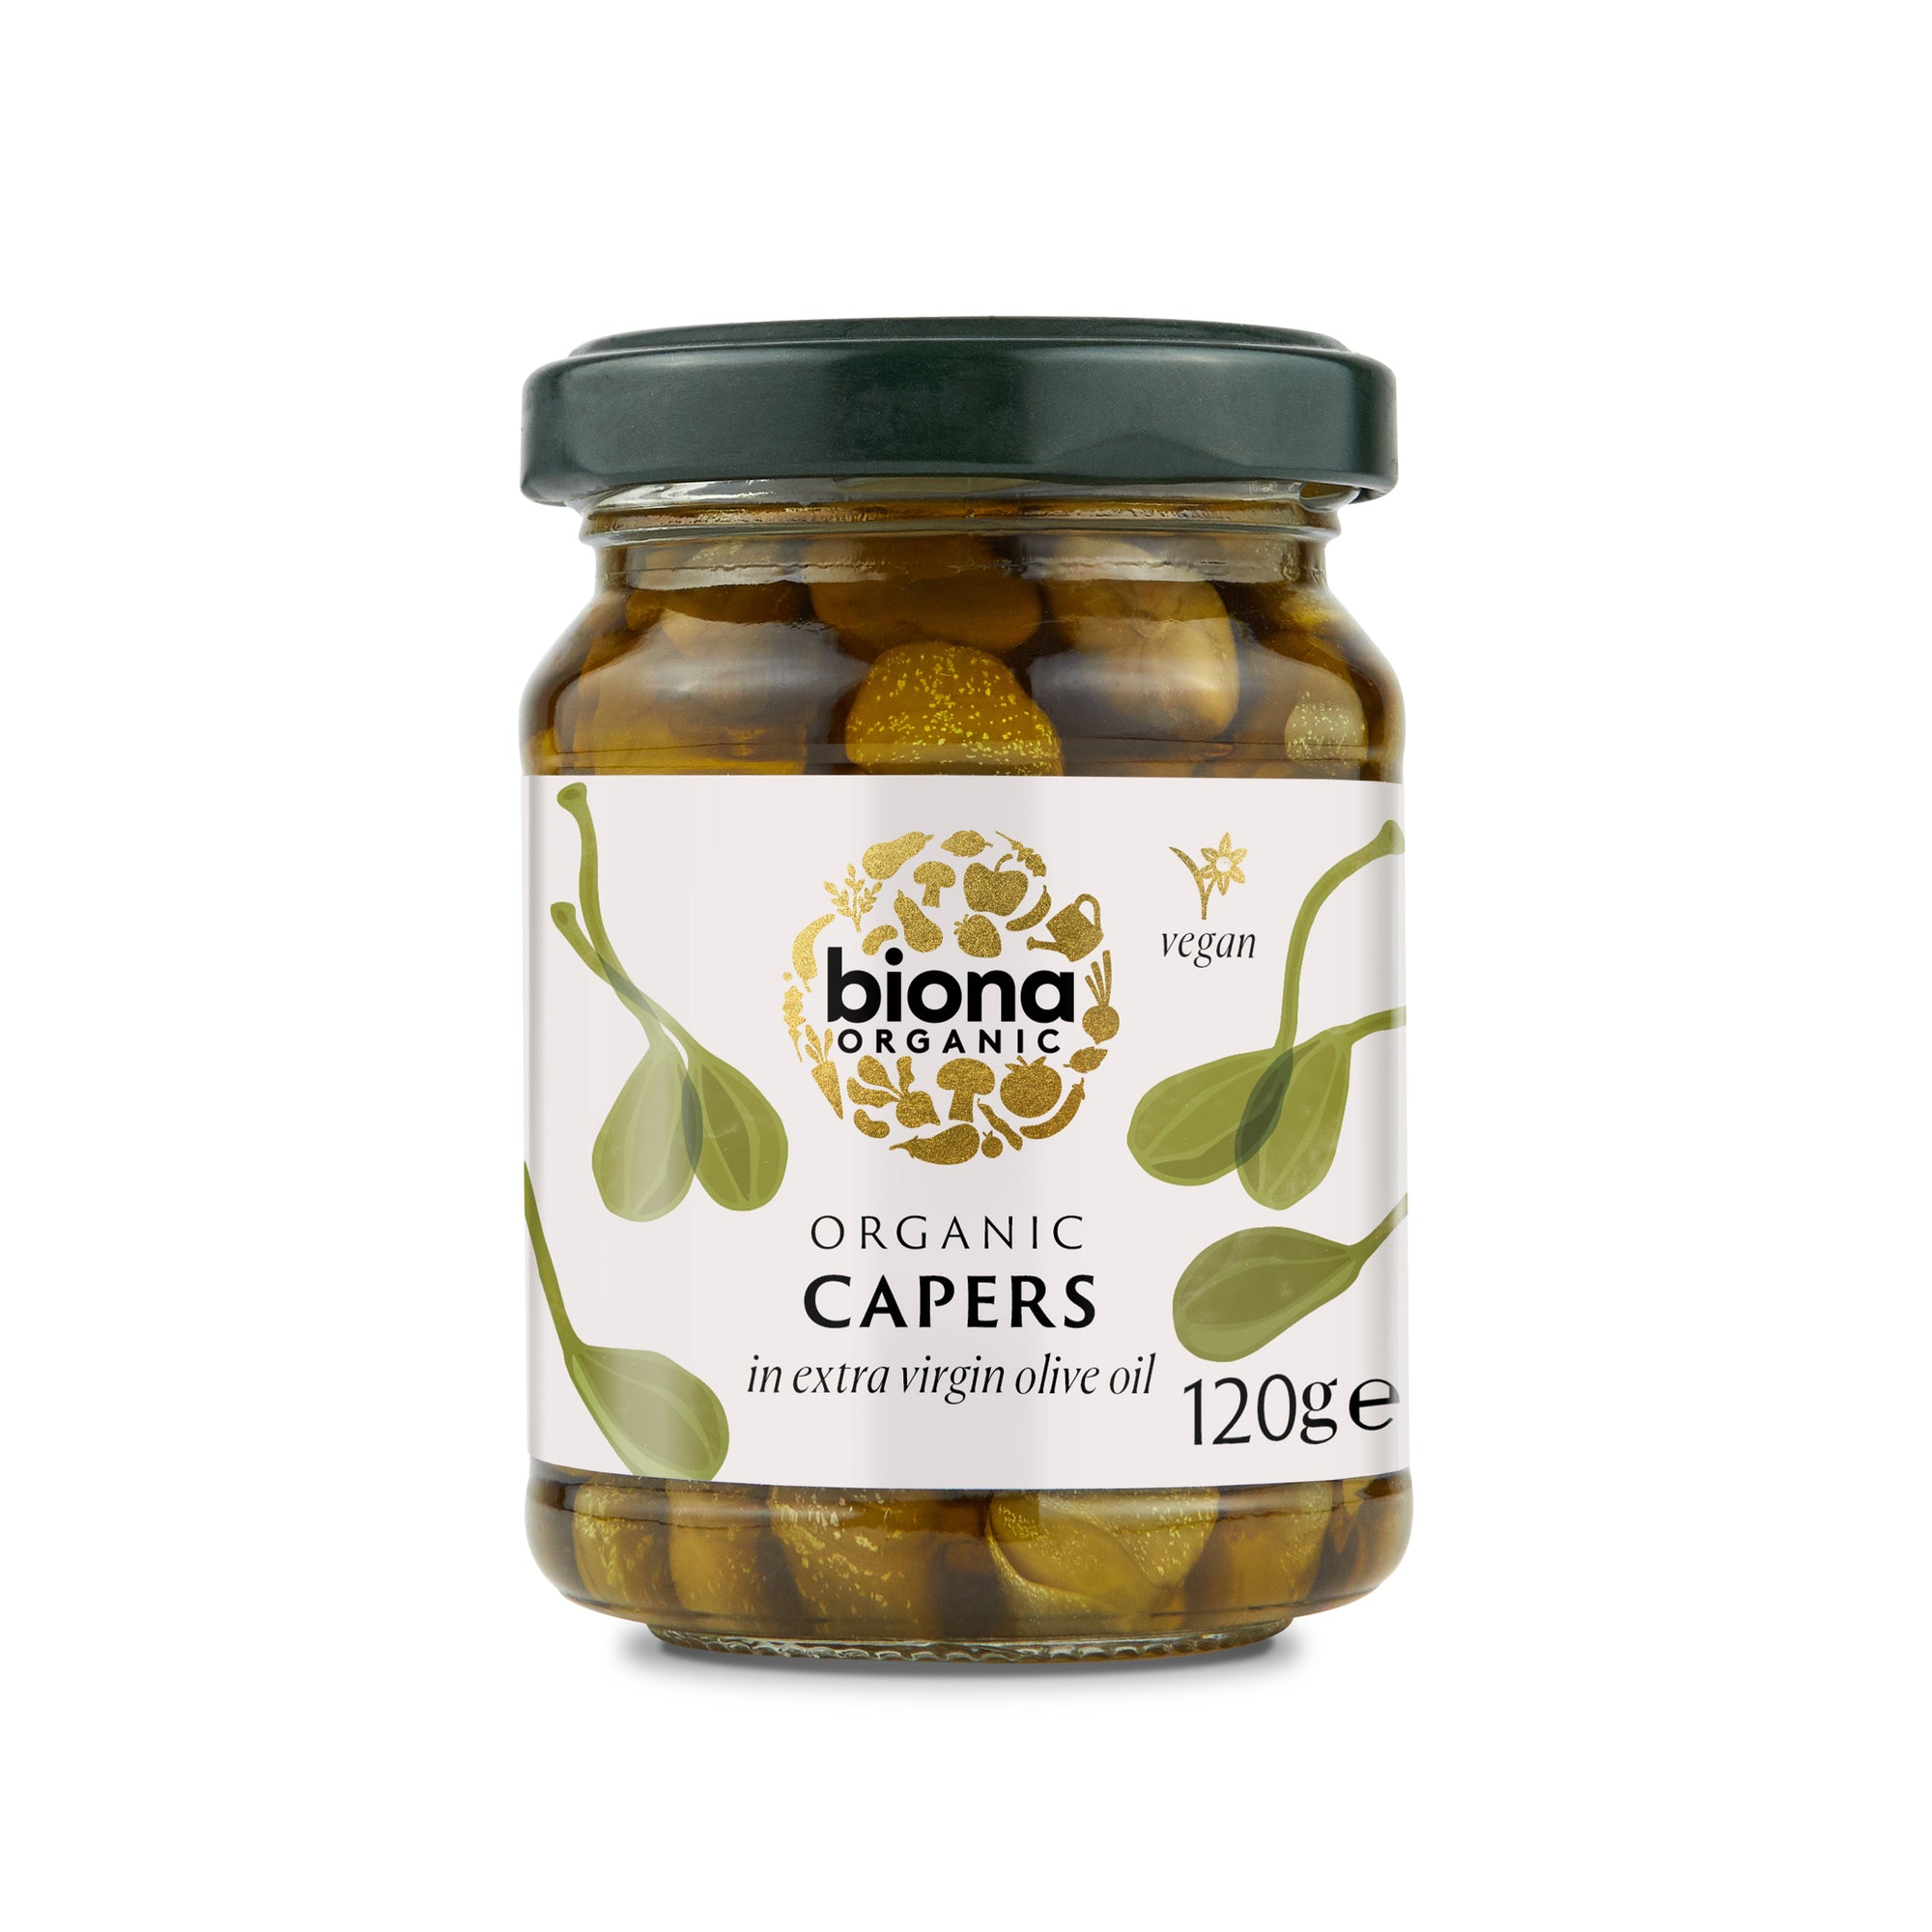 Biona Organic Capers in Extra Virgin Olive Oil (120g)